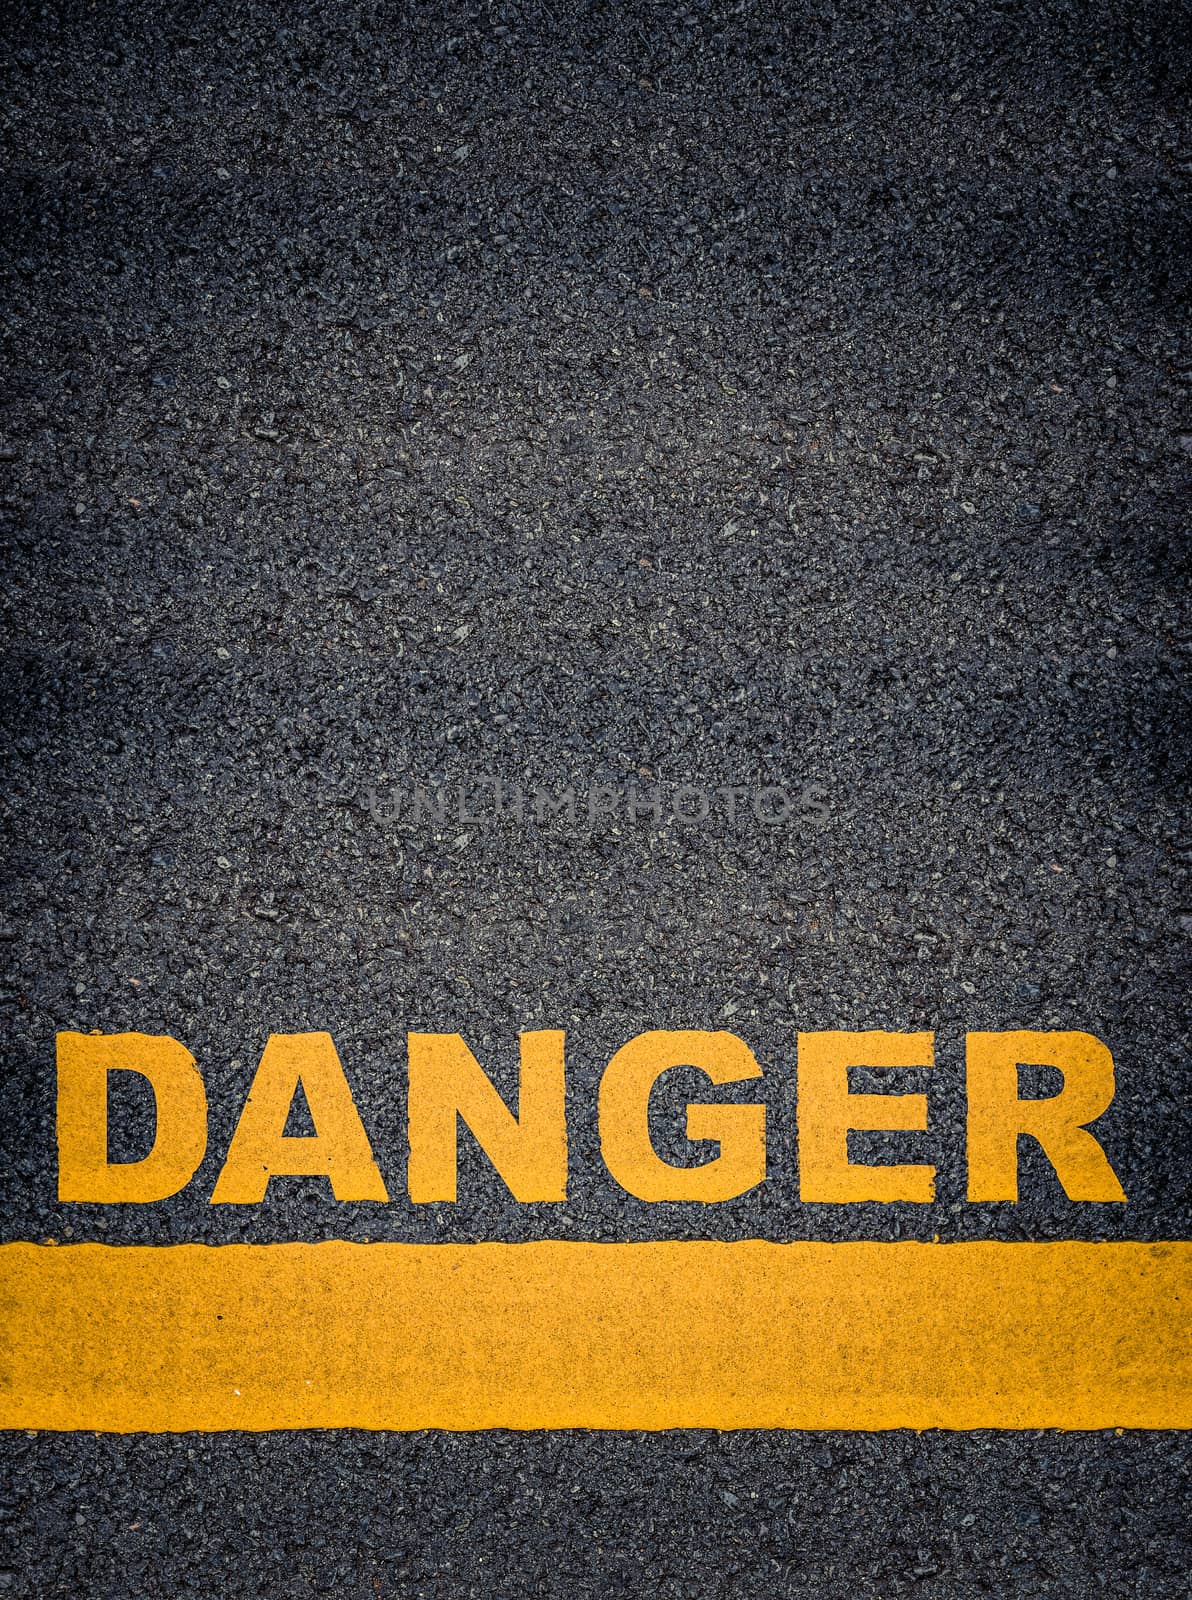 Conceptual Image Of Danger As Yellow Asphalt Road Markings With Single Line And Copy Space